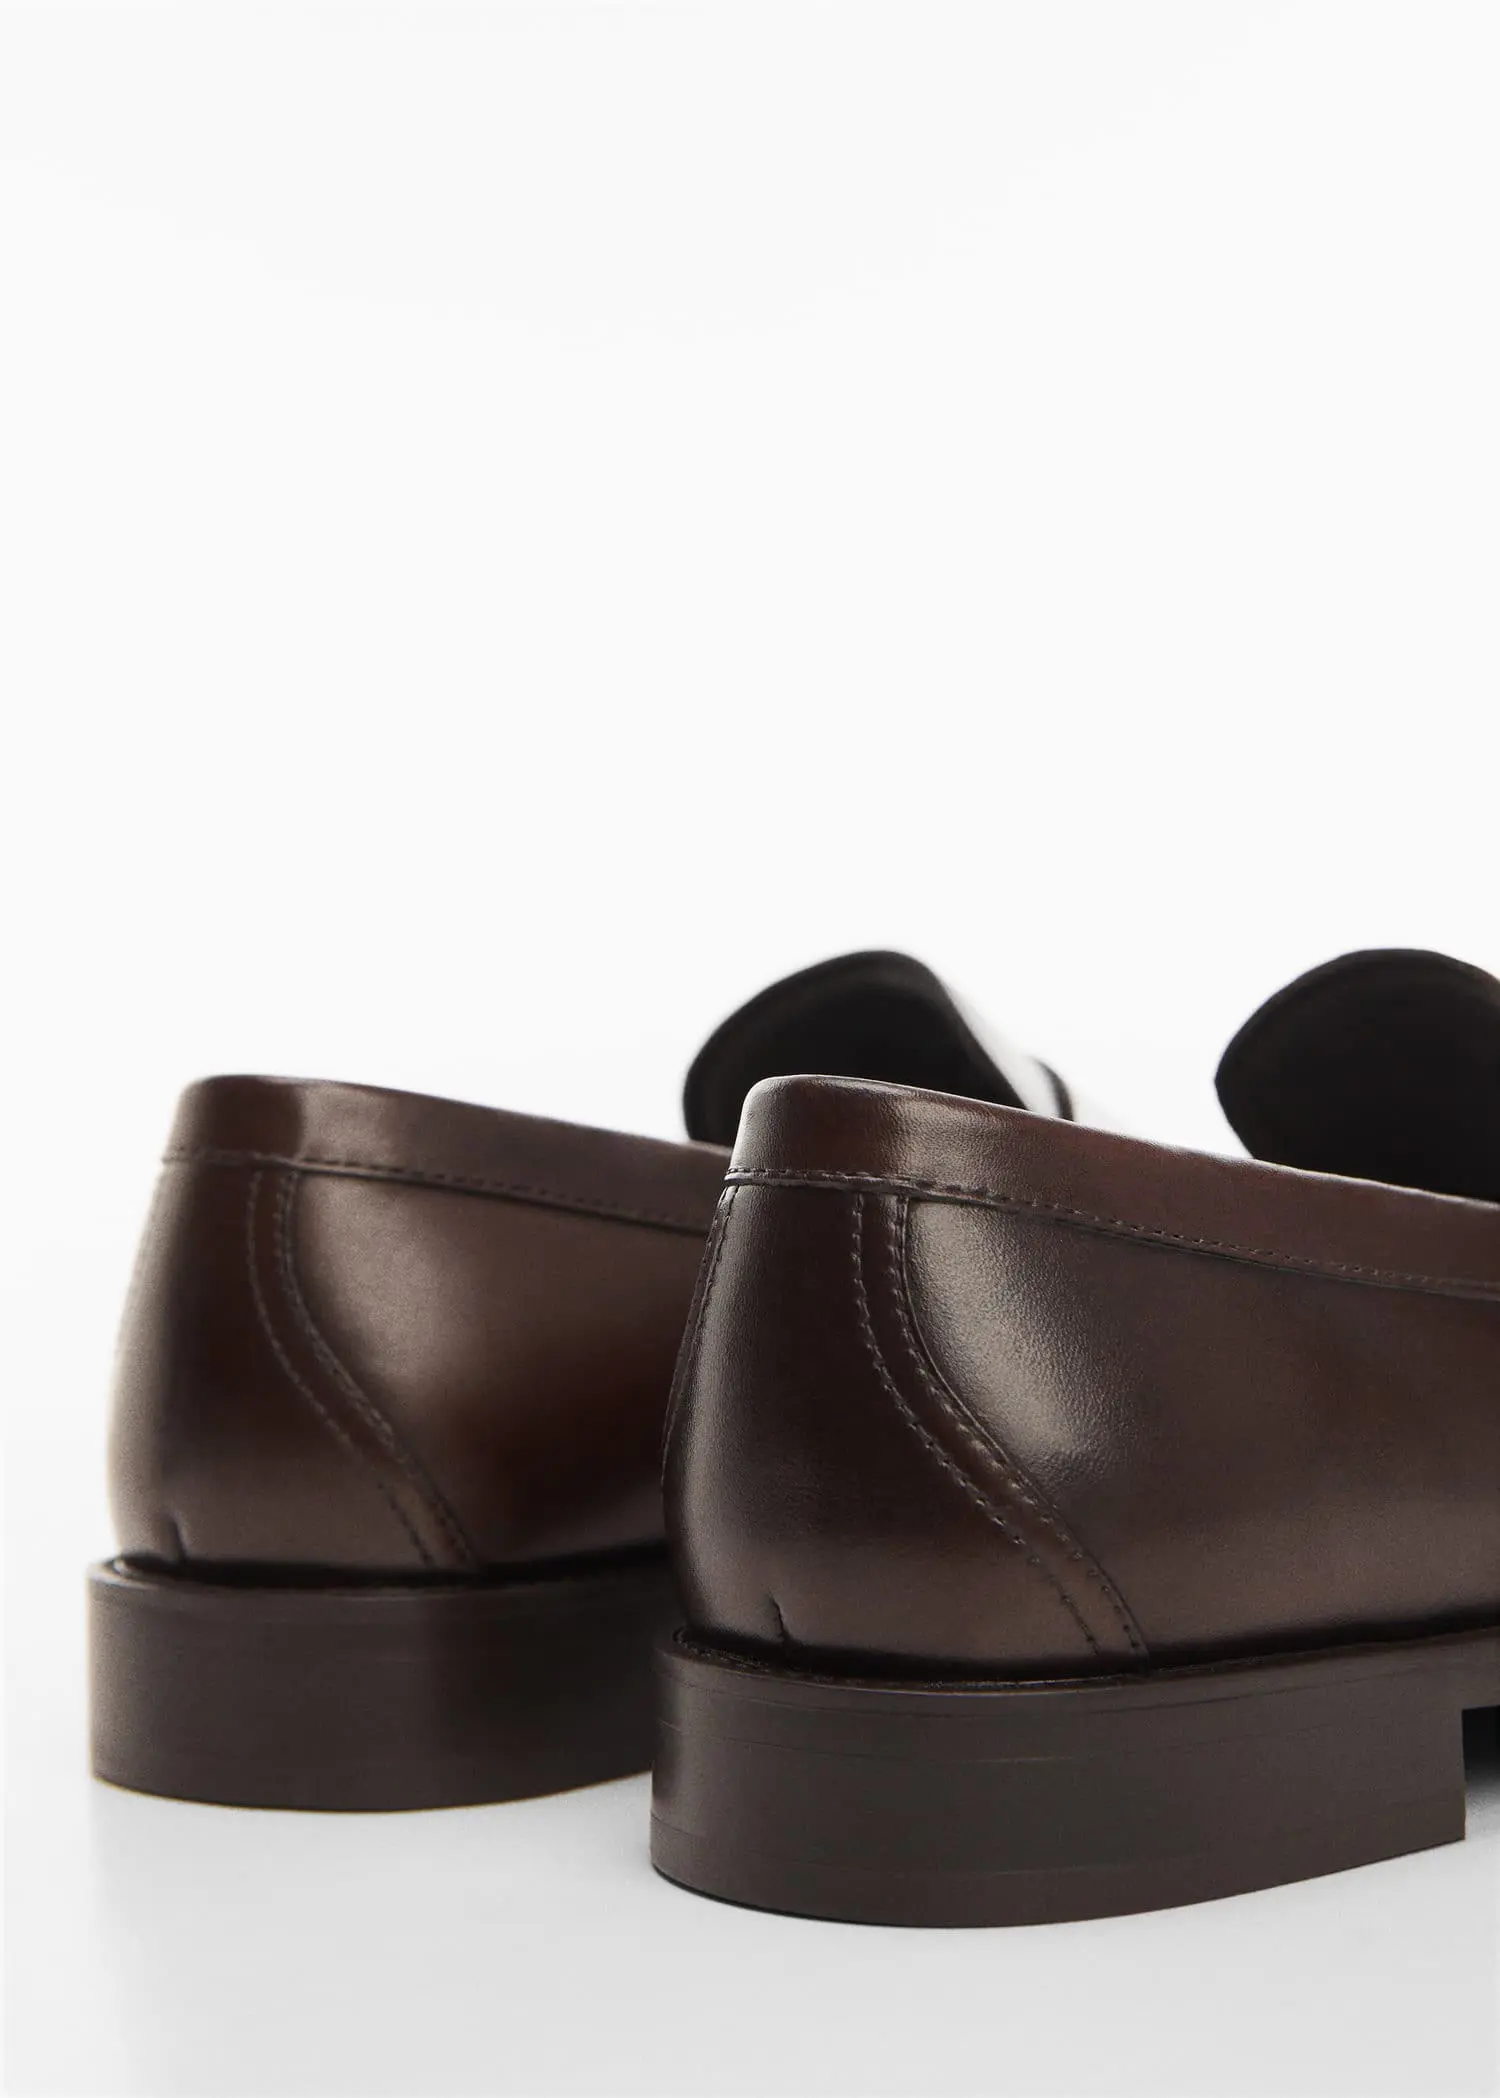 Mango Aged-leather loafers. 3